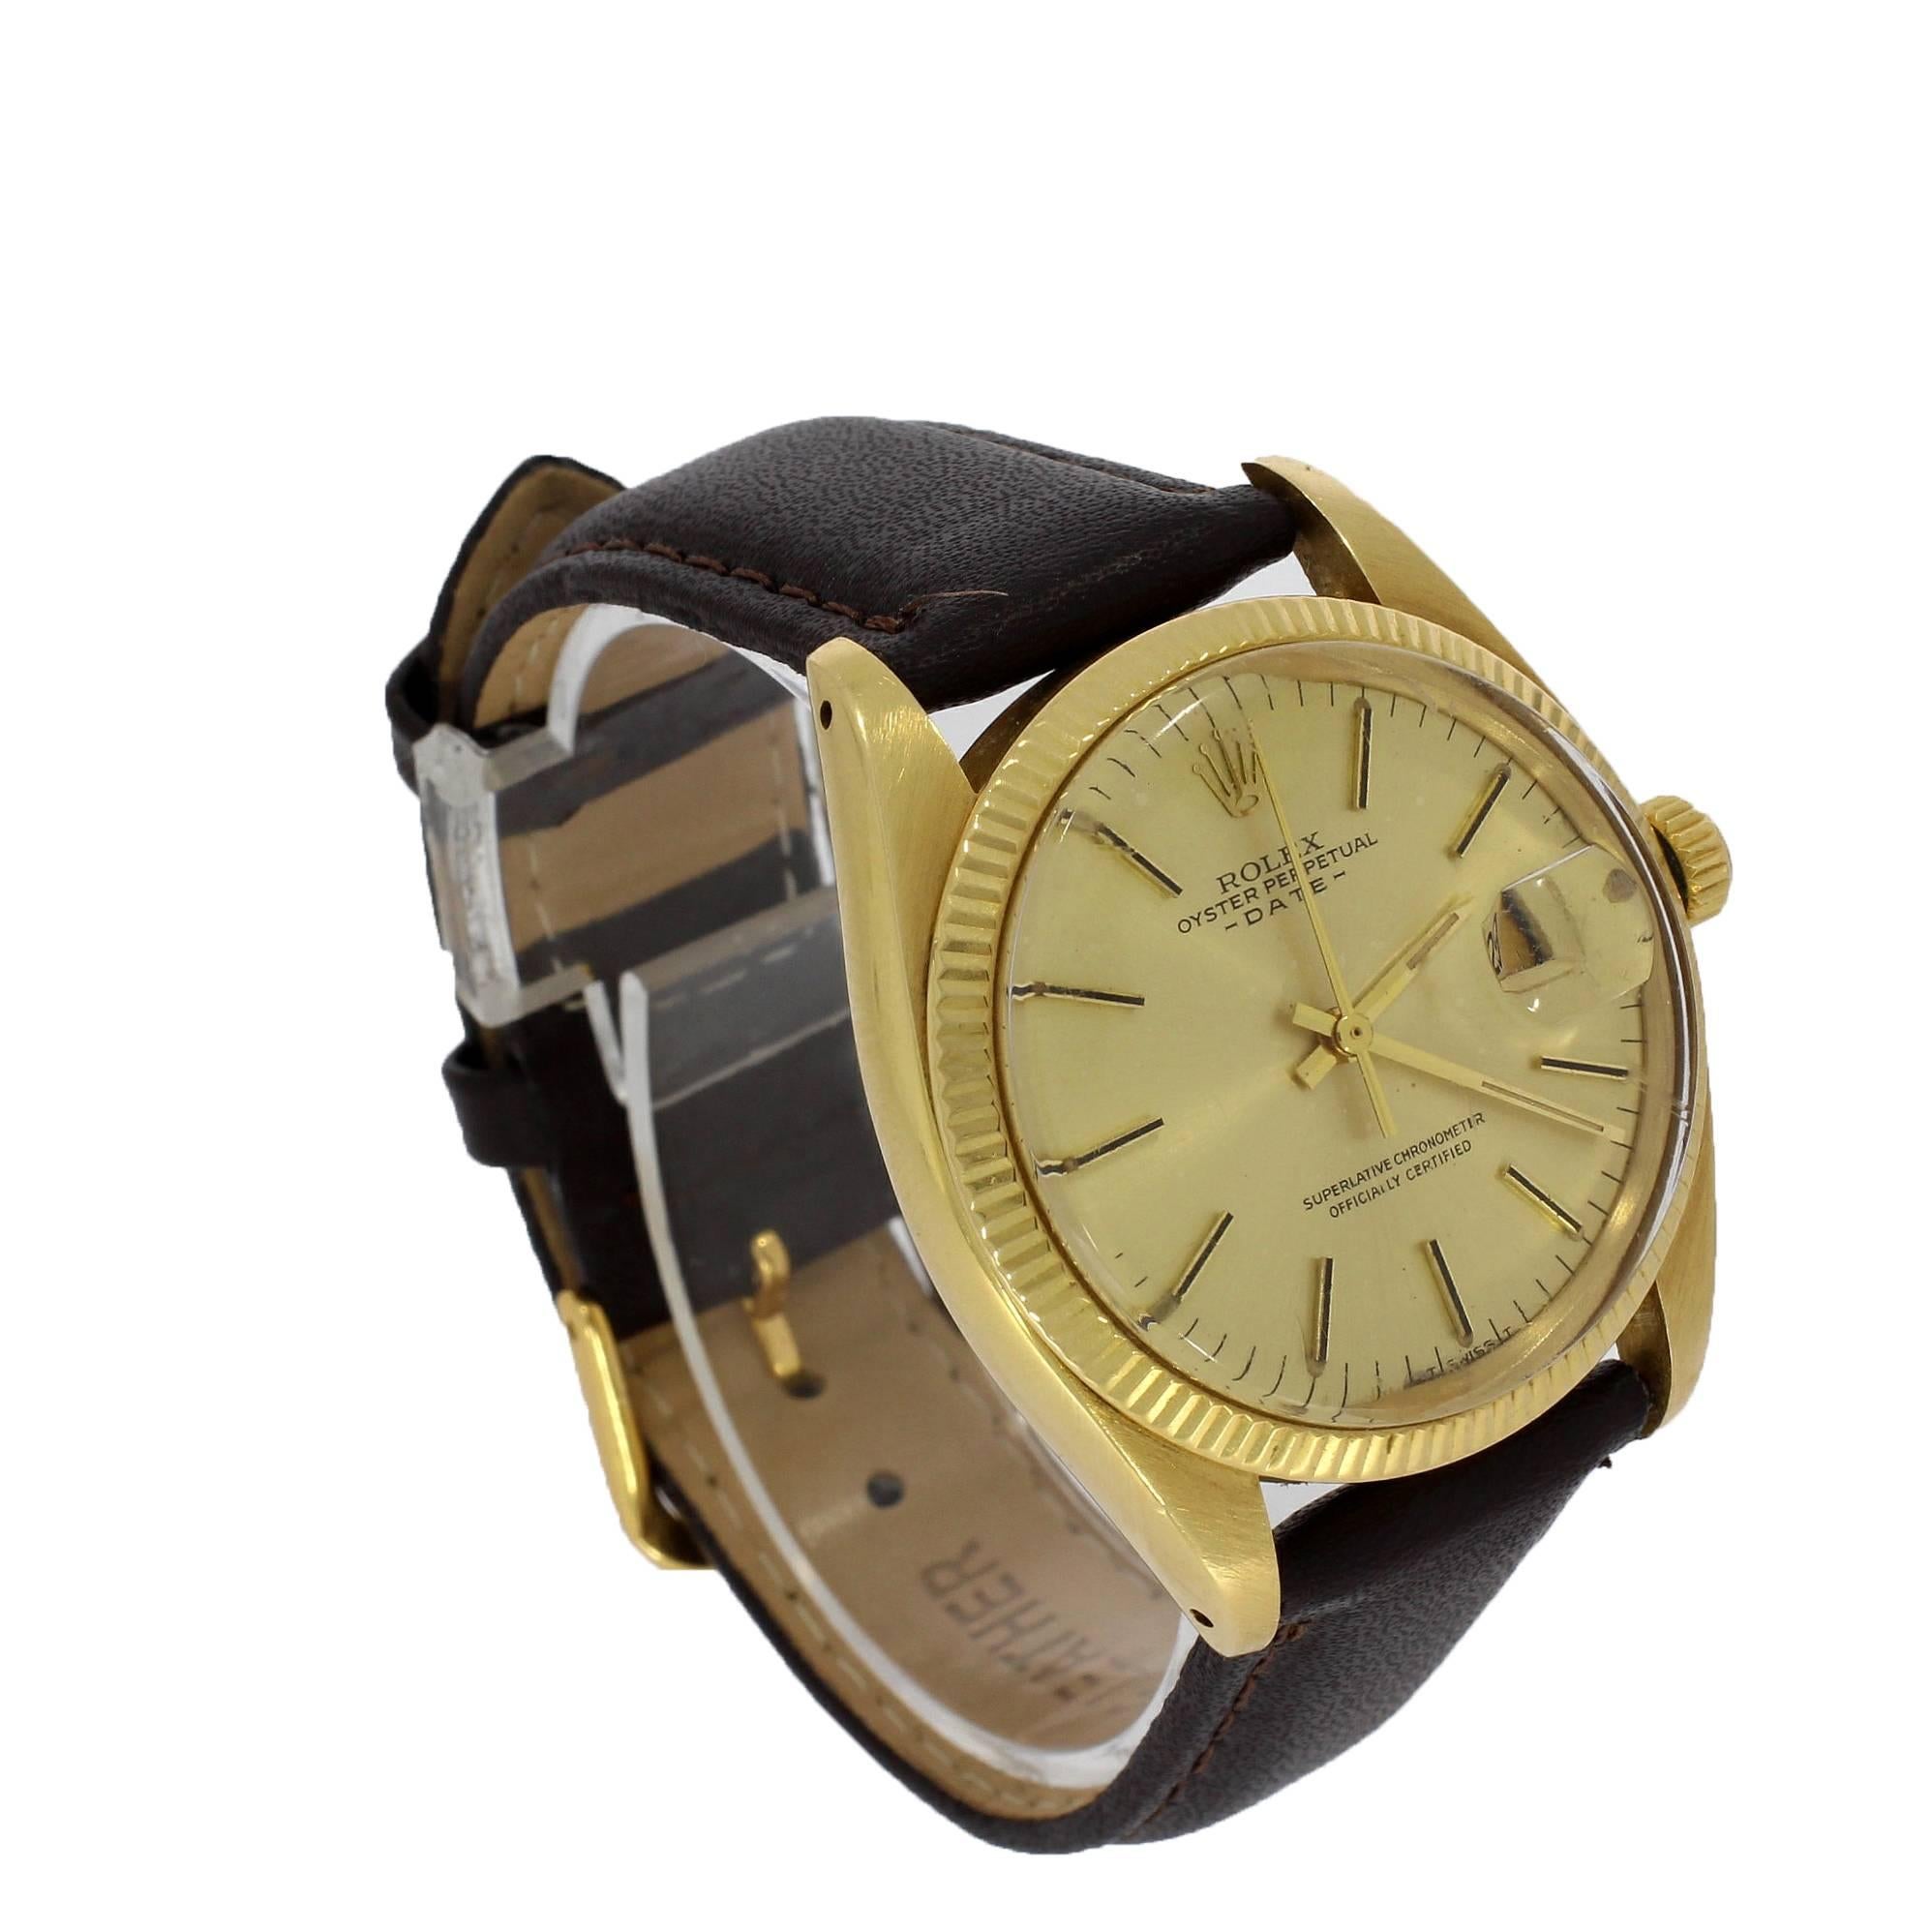 Rolex Yellow Gold Date Calibre 1570 Wristwatch Ref 1503, 1977 For Sale 4